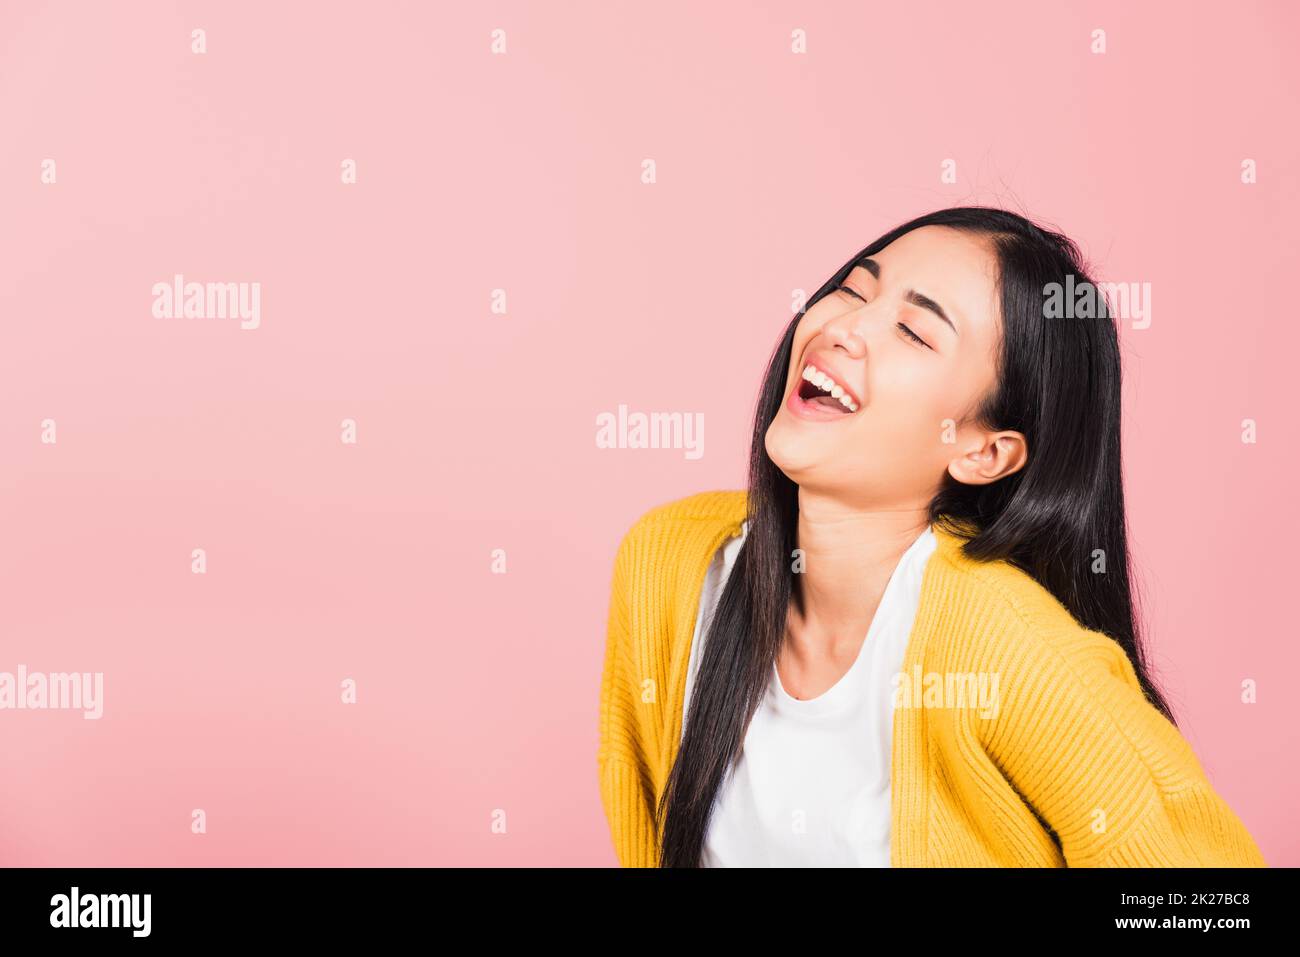 woman standing winning and surprised excited screaming laughing Stock Photo